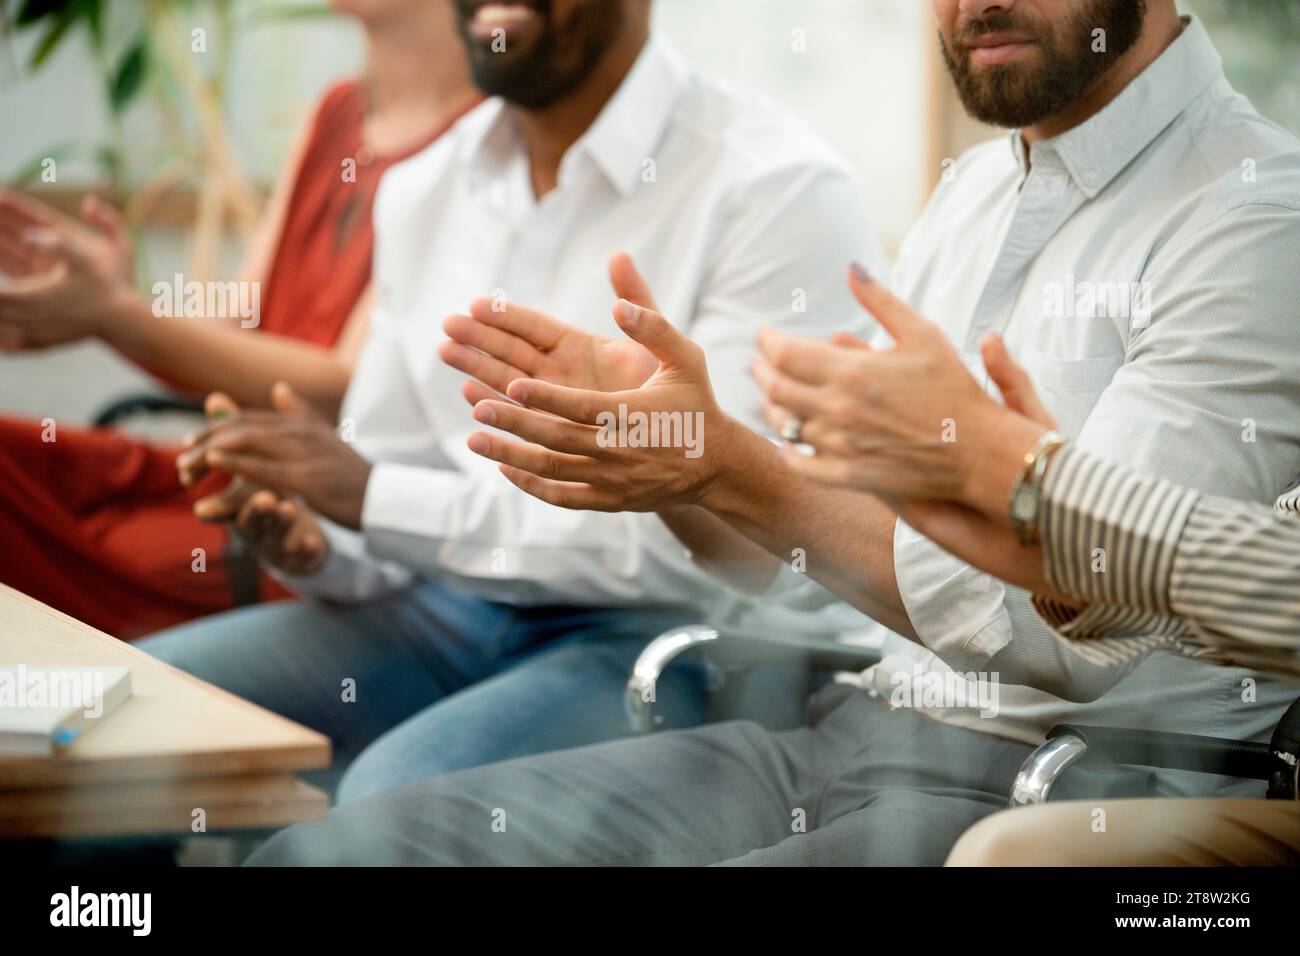 Mid section of business workers clapping hands after meeting Stock Photo